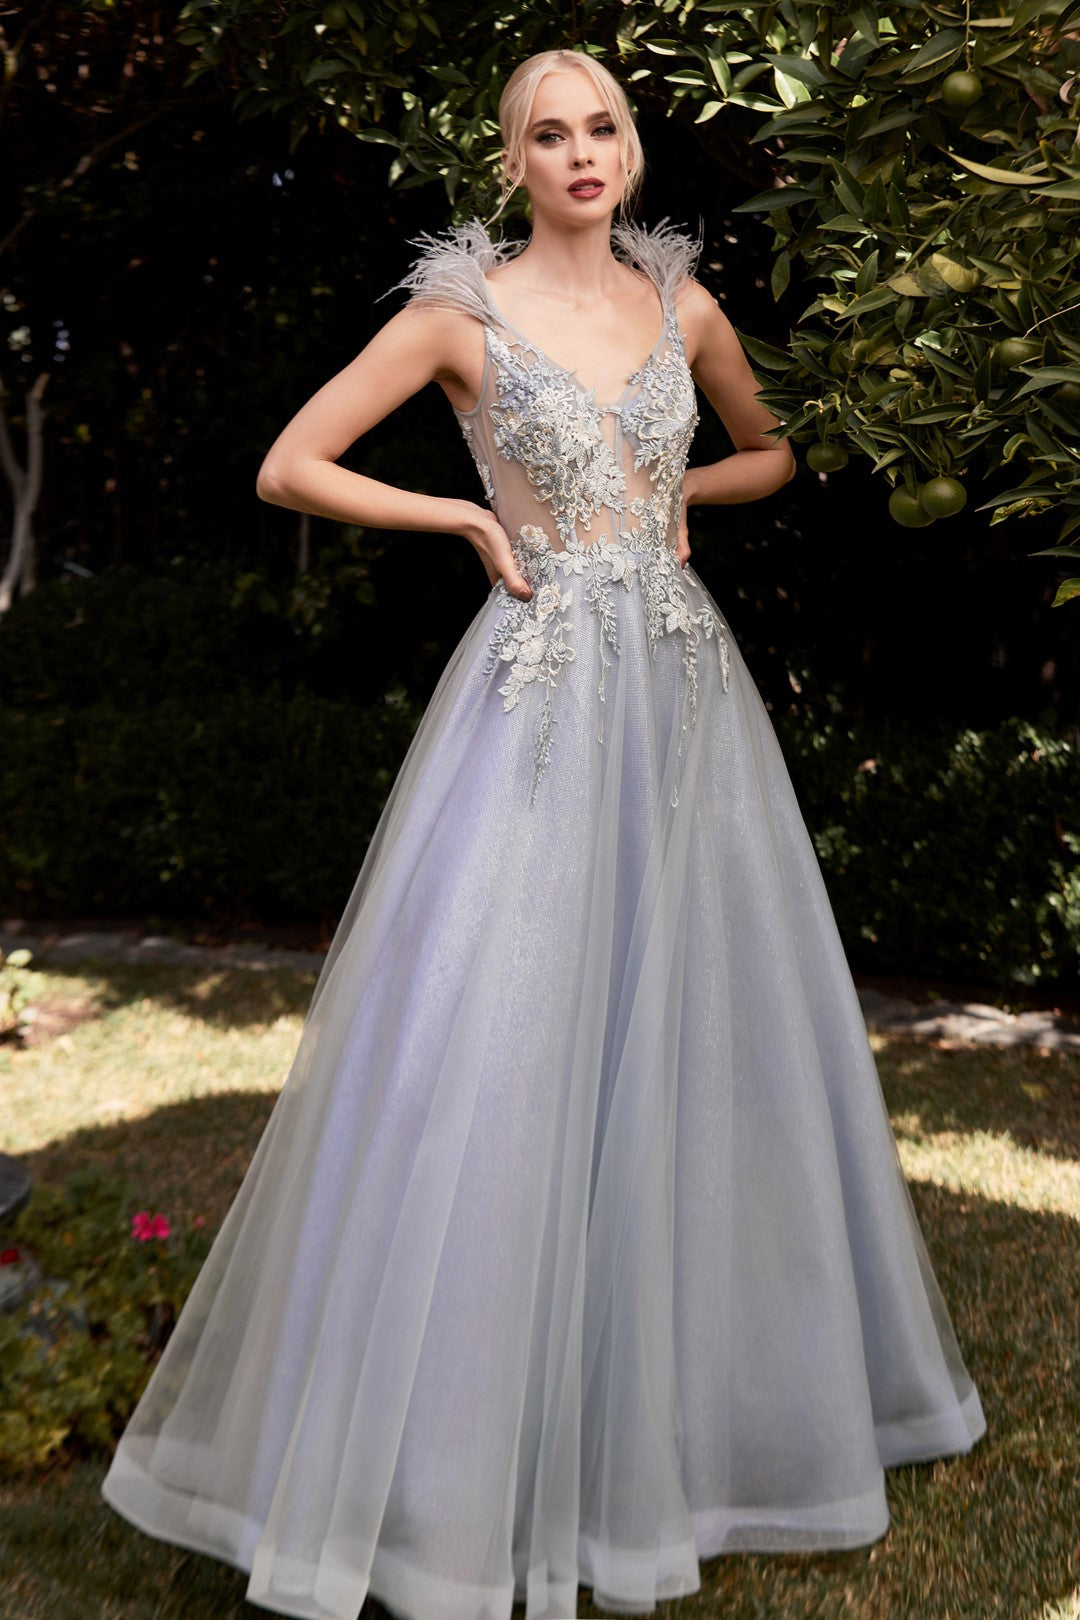 The Alexandra Floral Feather Ball Gown